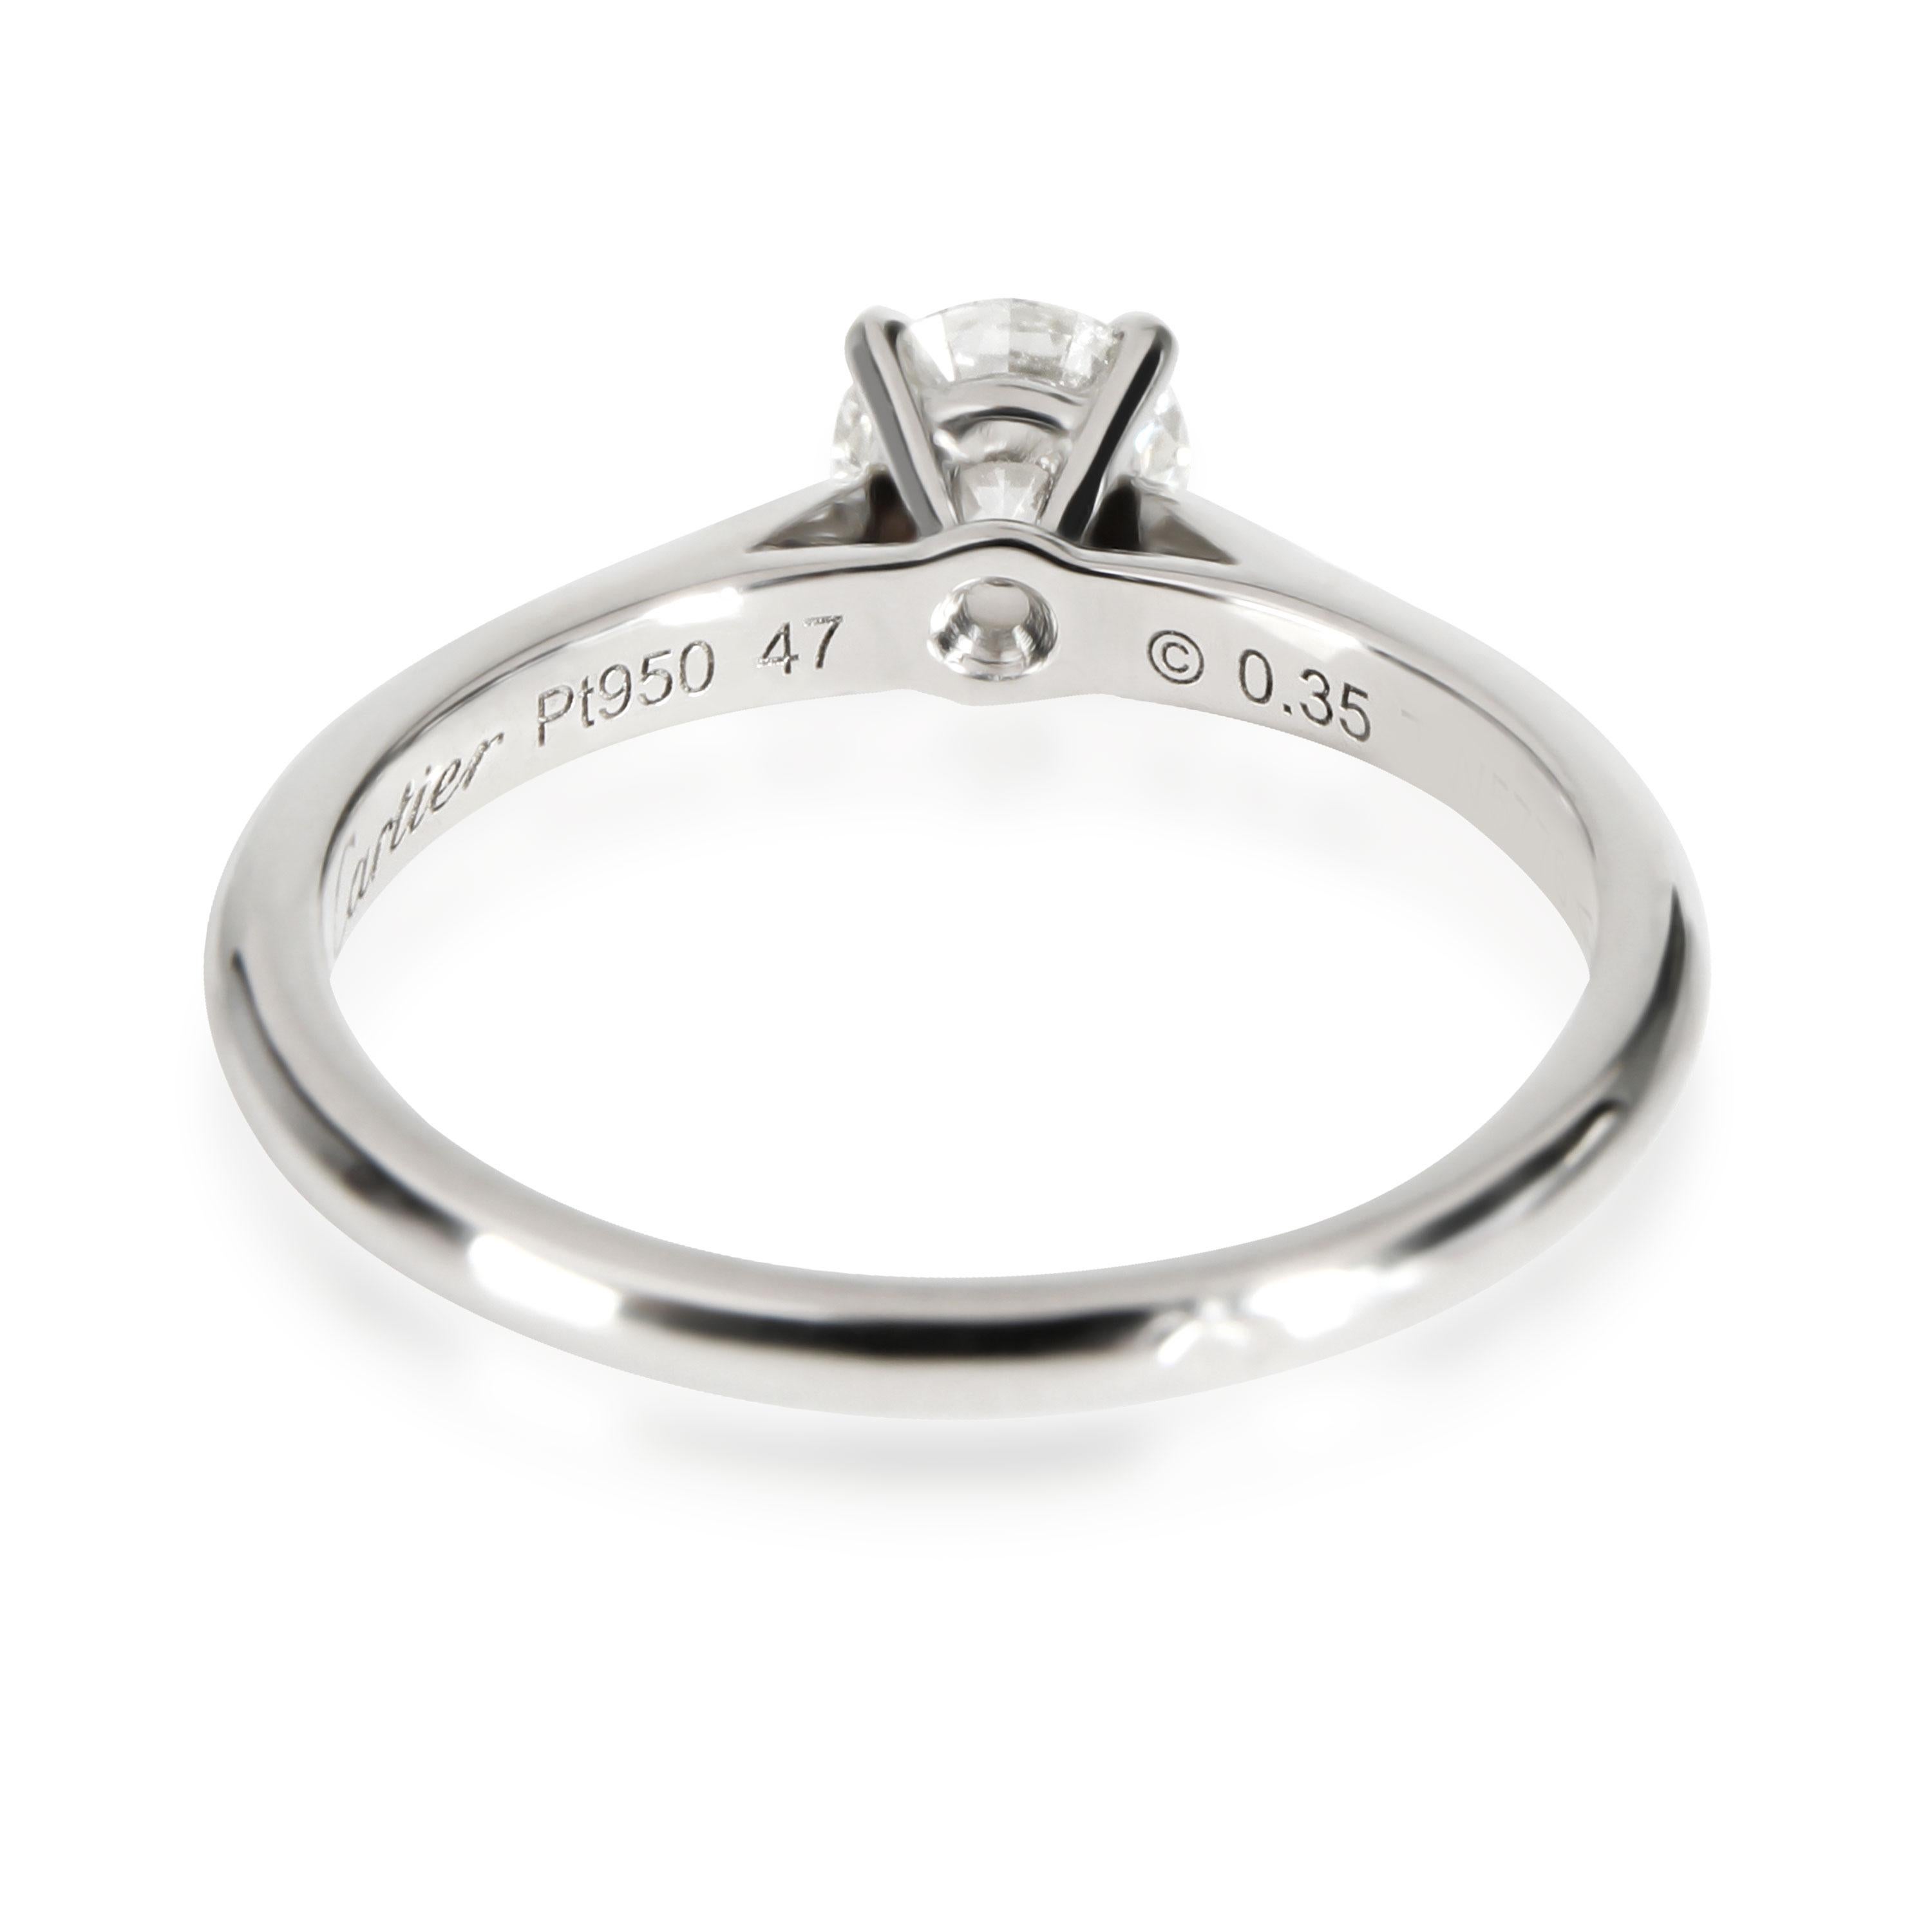 Cartier 1895 Diamond Engagement Ring in  Platinum G VS1 0.35 CTW
Cartier 1895 Diamond Engagement Ring in  Platinum G VS1 0.35 CTW

PRIMARY DETAILS
SKU: 112378
Listing Title: Cartier 1895 Diamond Engagement Ring in Platinum G VS1 0.35 CTW
Condition